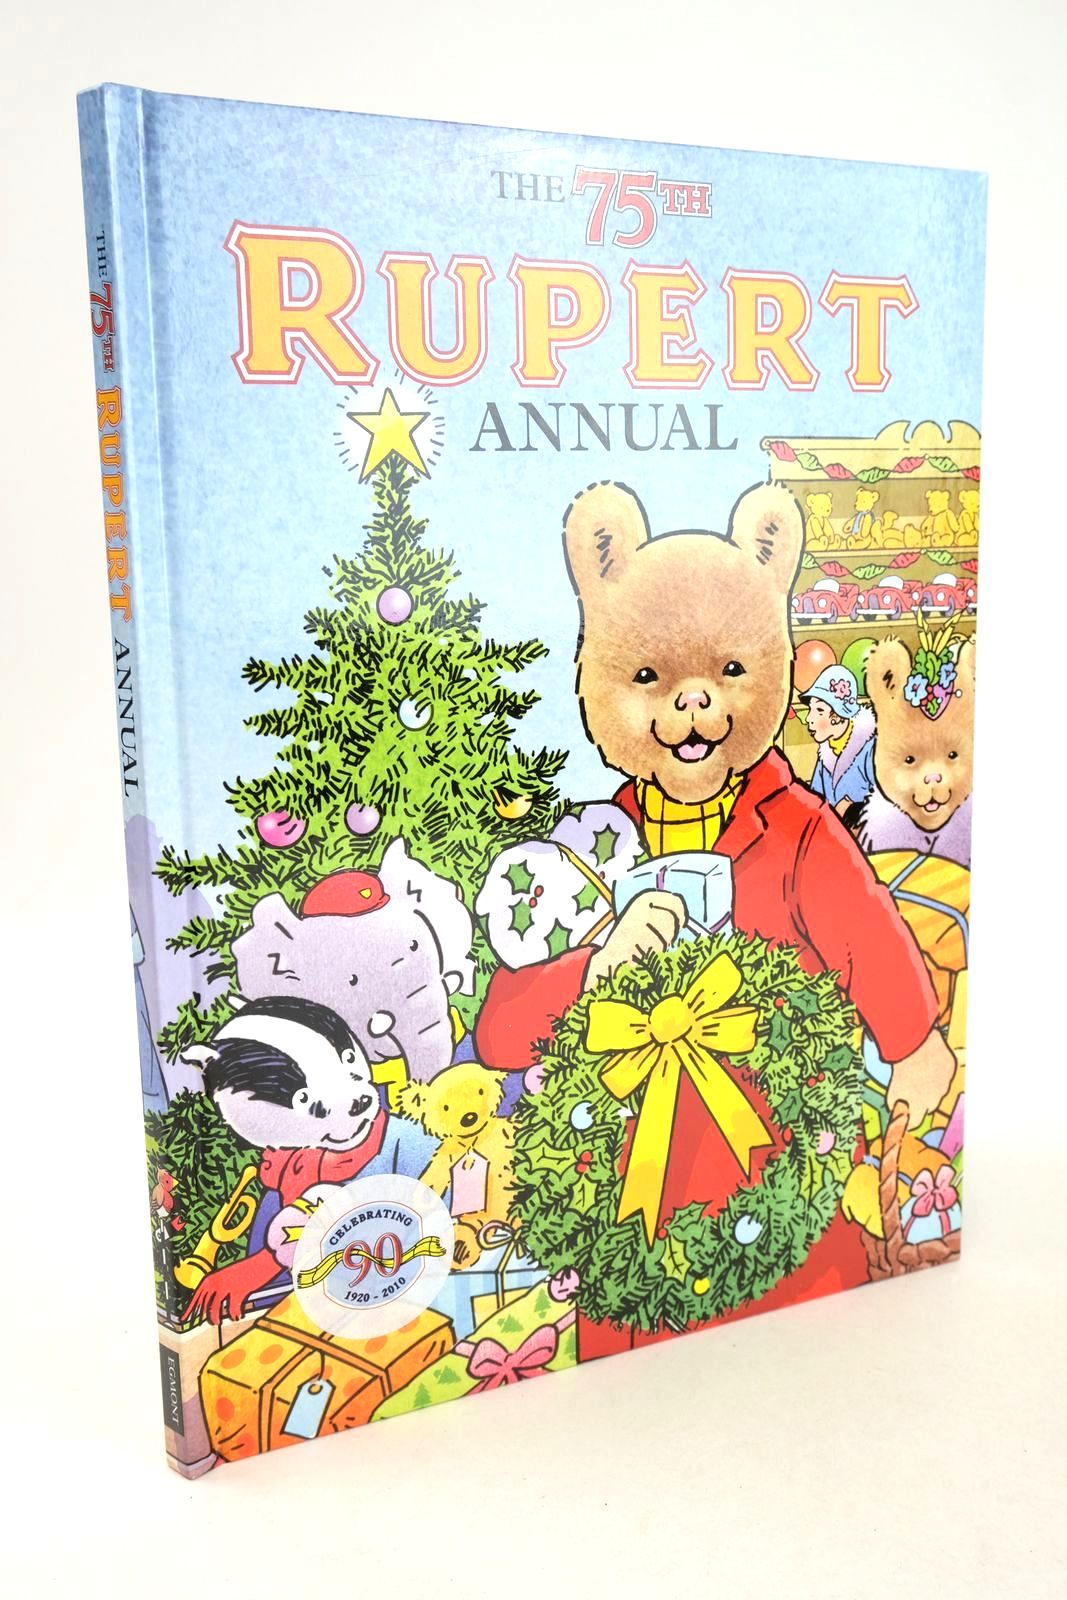 Photo of RUPERT ANNUAL 2010 written by Trotter, Stuart published by Egmont Books Ltd. (STOCK CODE: 1325860)  for sale by Stella & Rose's Books